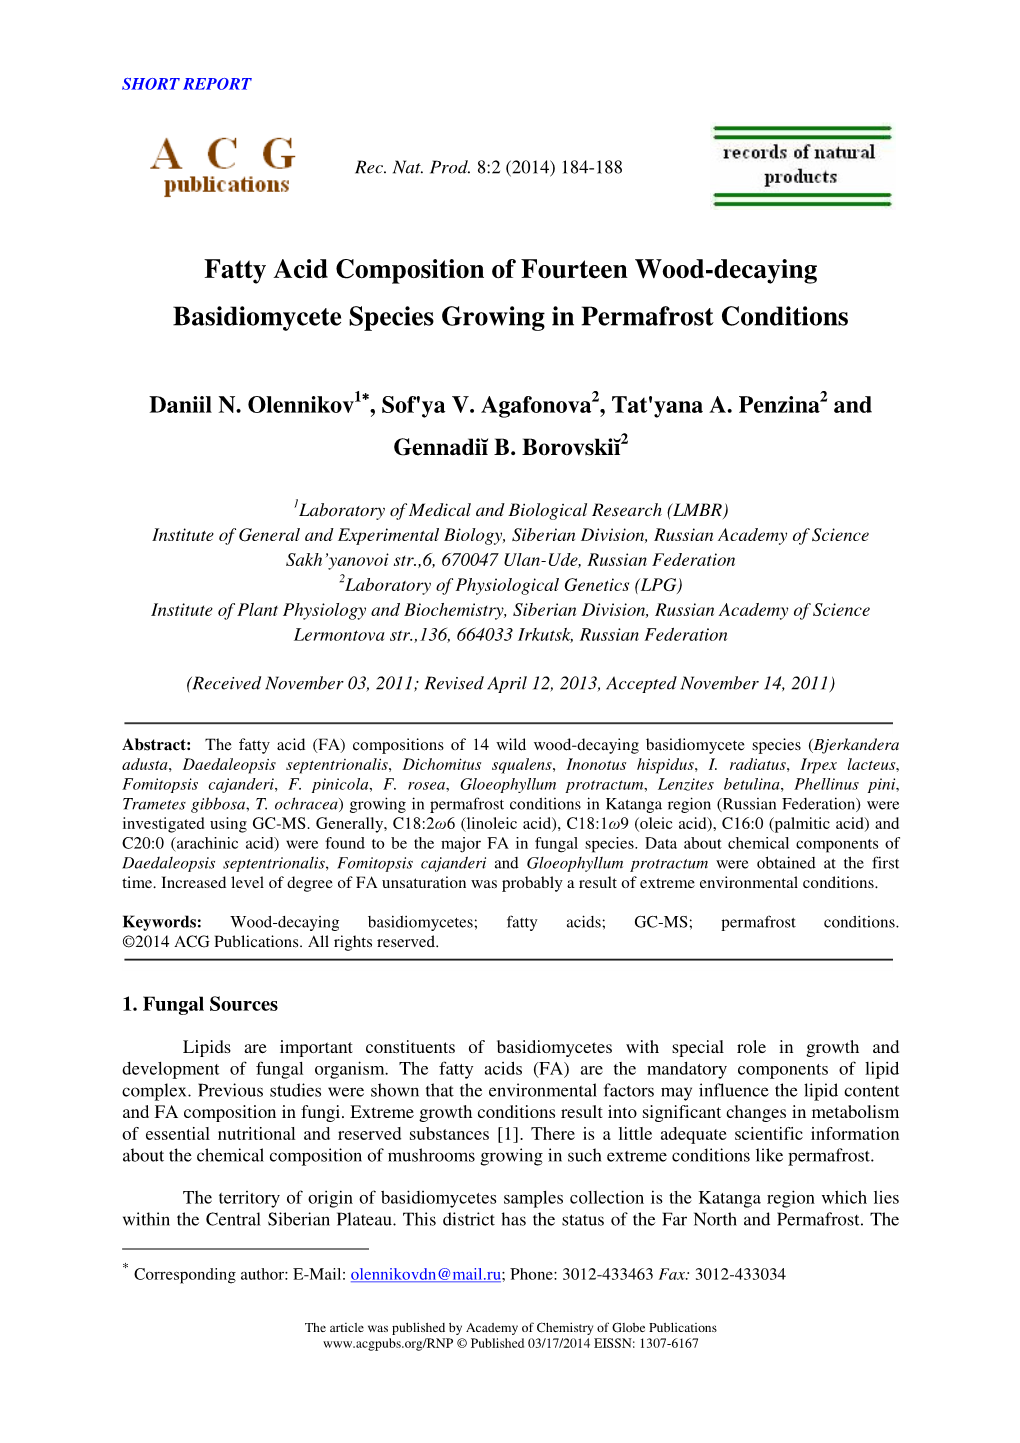 Fatty Acid Composition of Fourteen Wood-Decaying Basidiomycete Species Growing in Permafrost Conditions